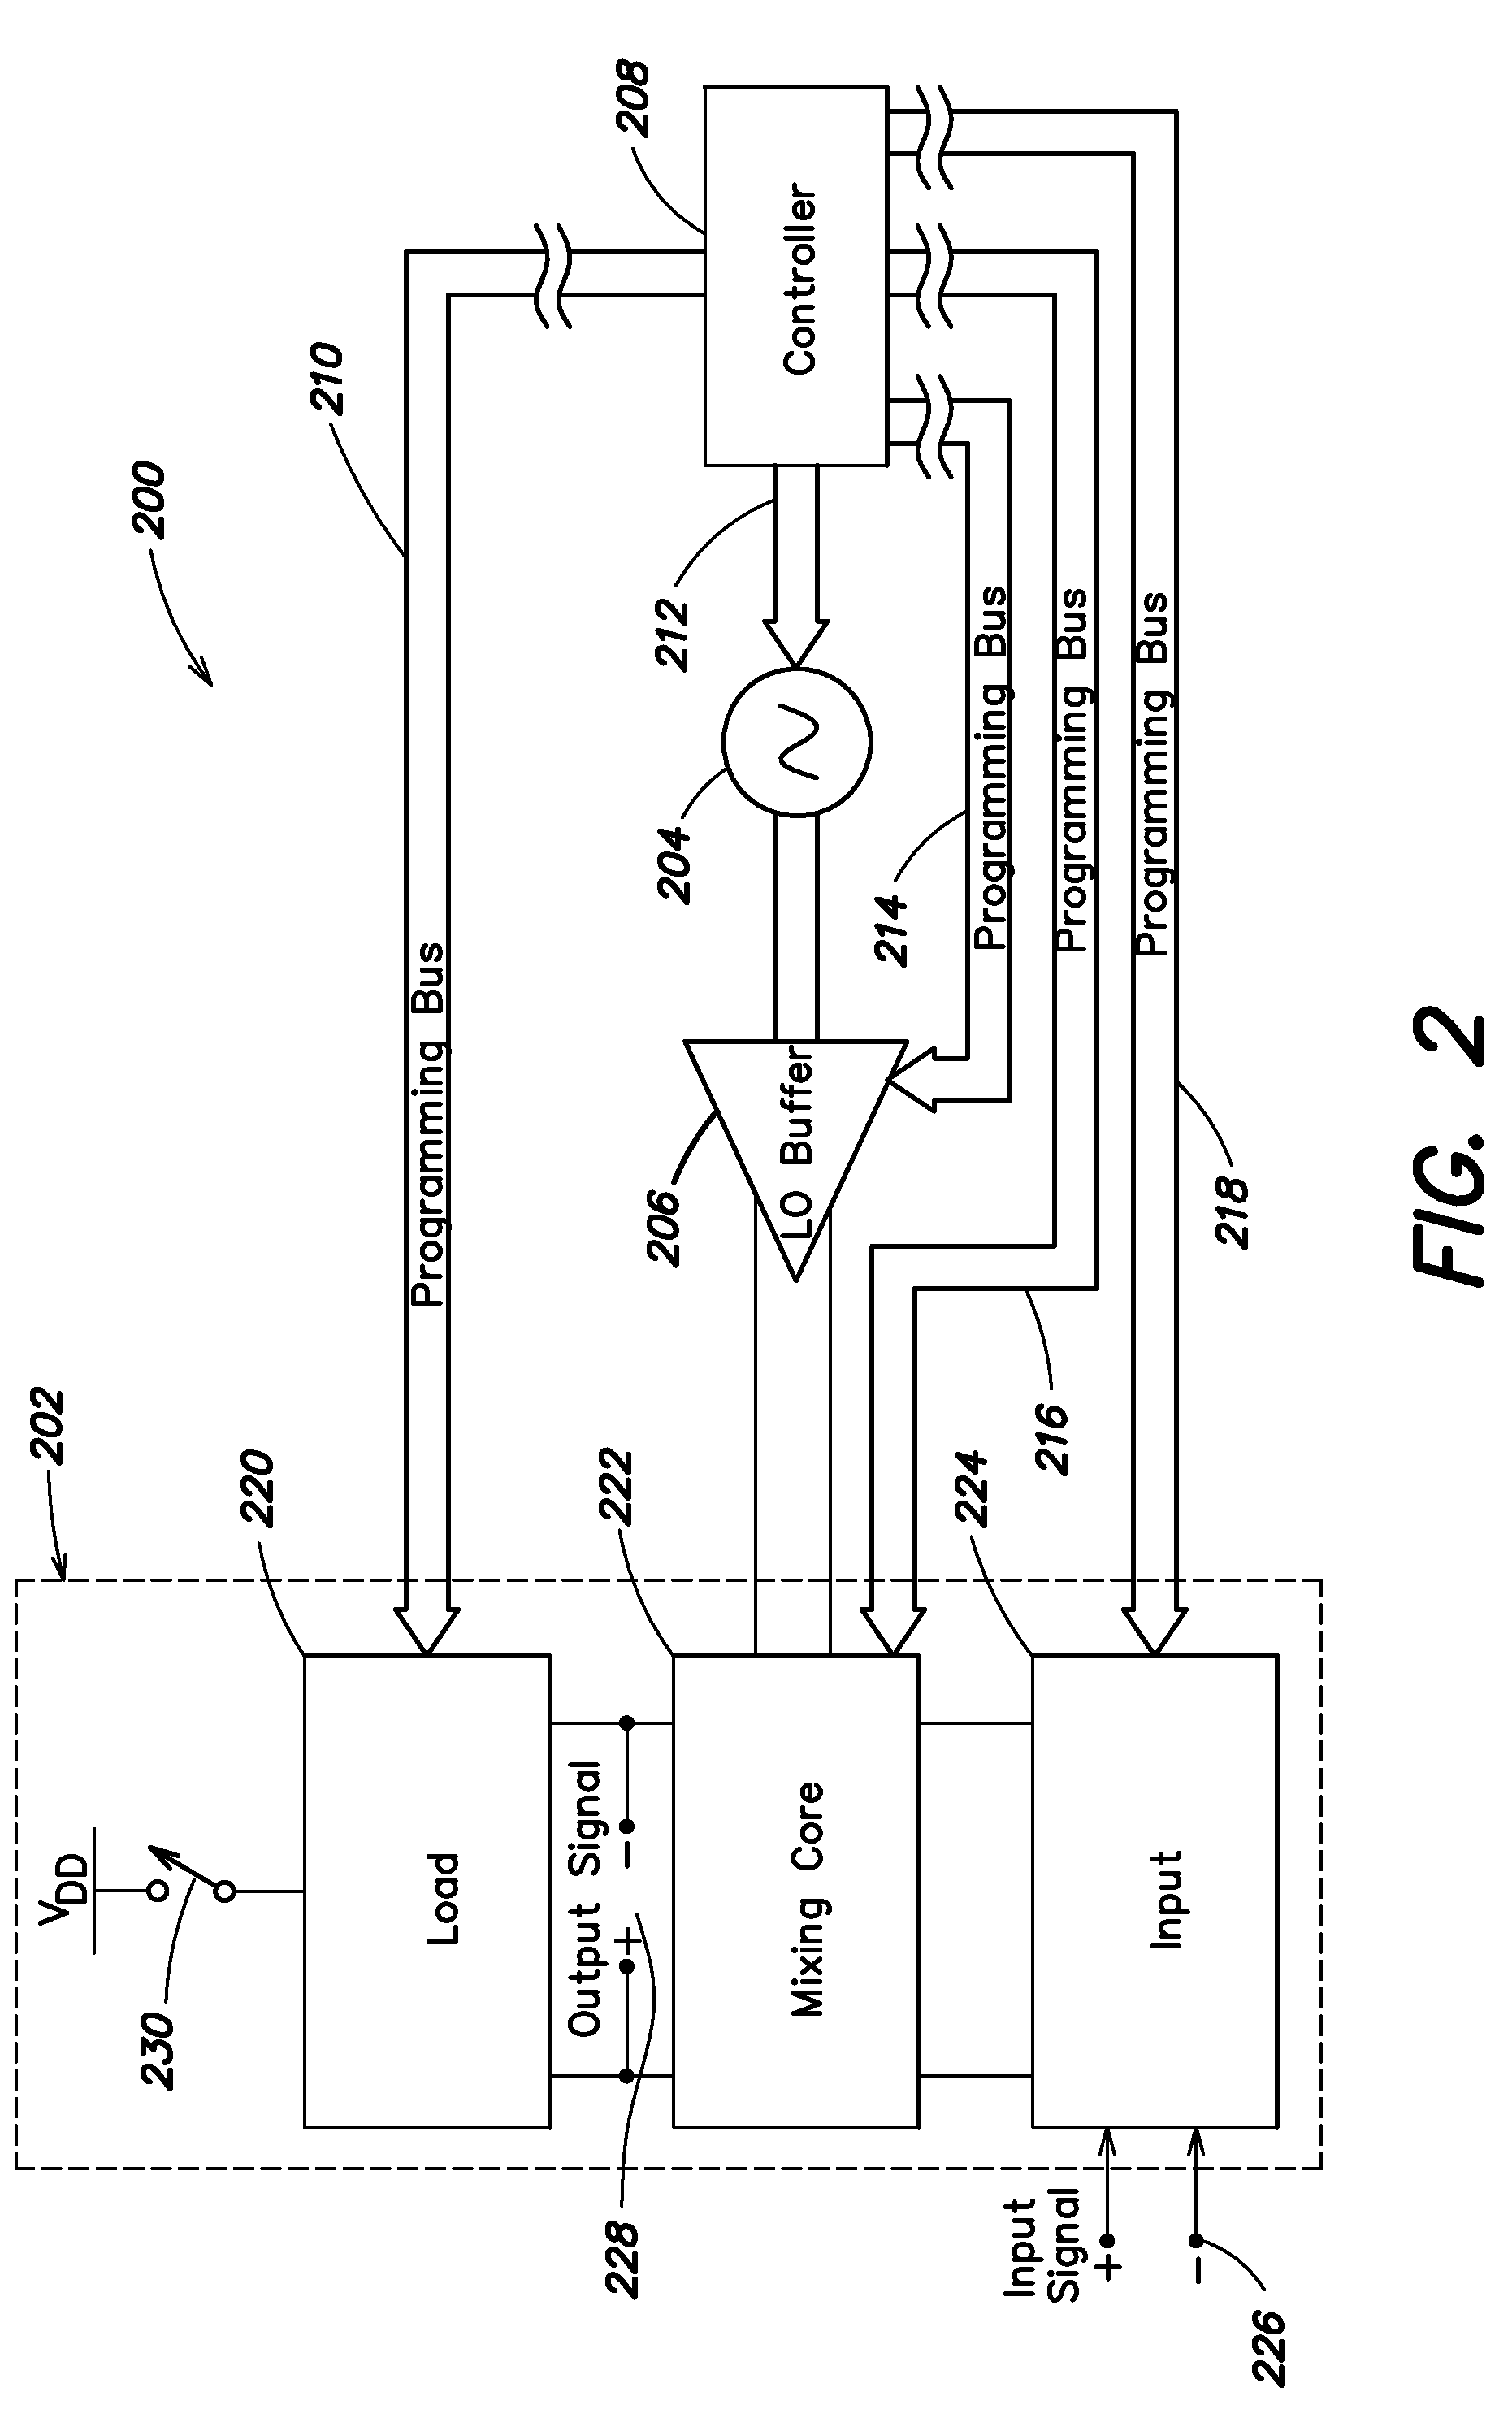 Reconfigurable mixer with gain control